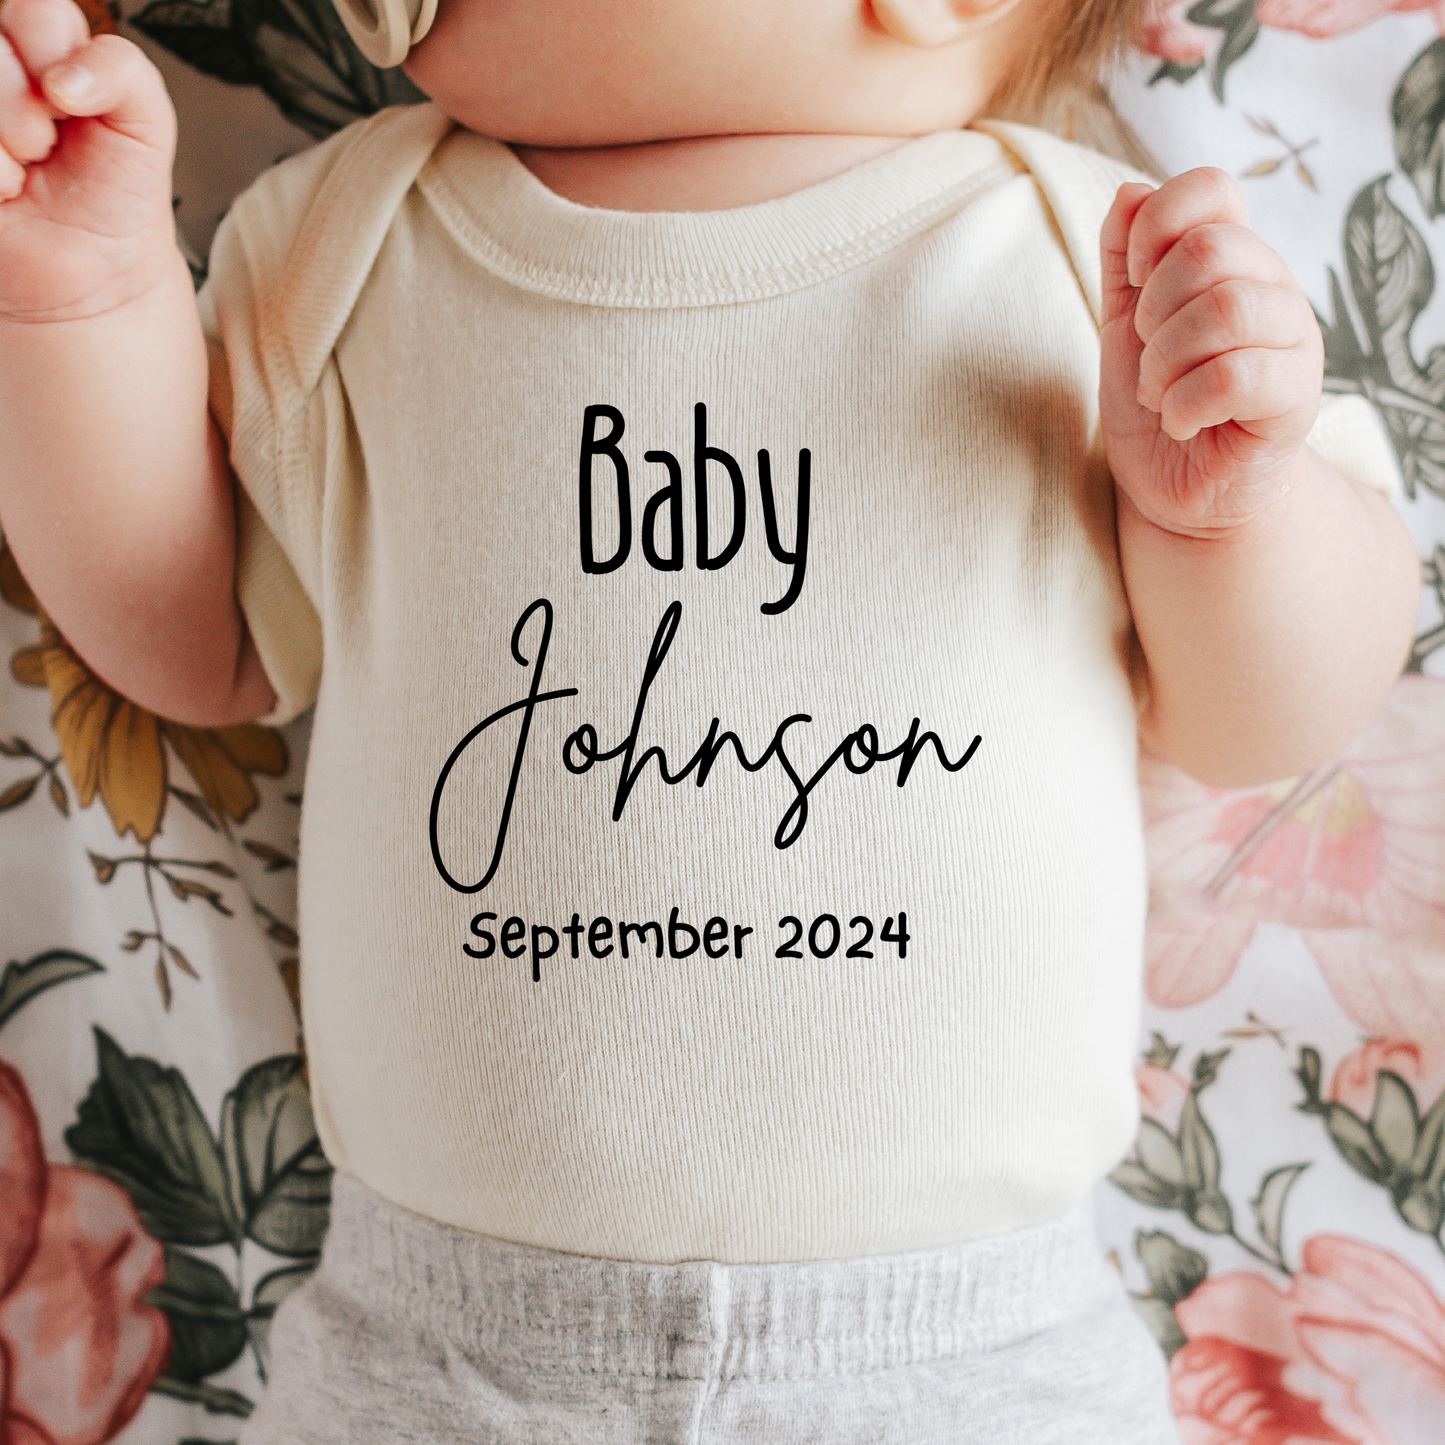 Personalised Family Name Baby Onepiece for Pregnancy Announcement